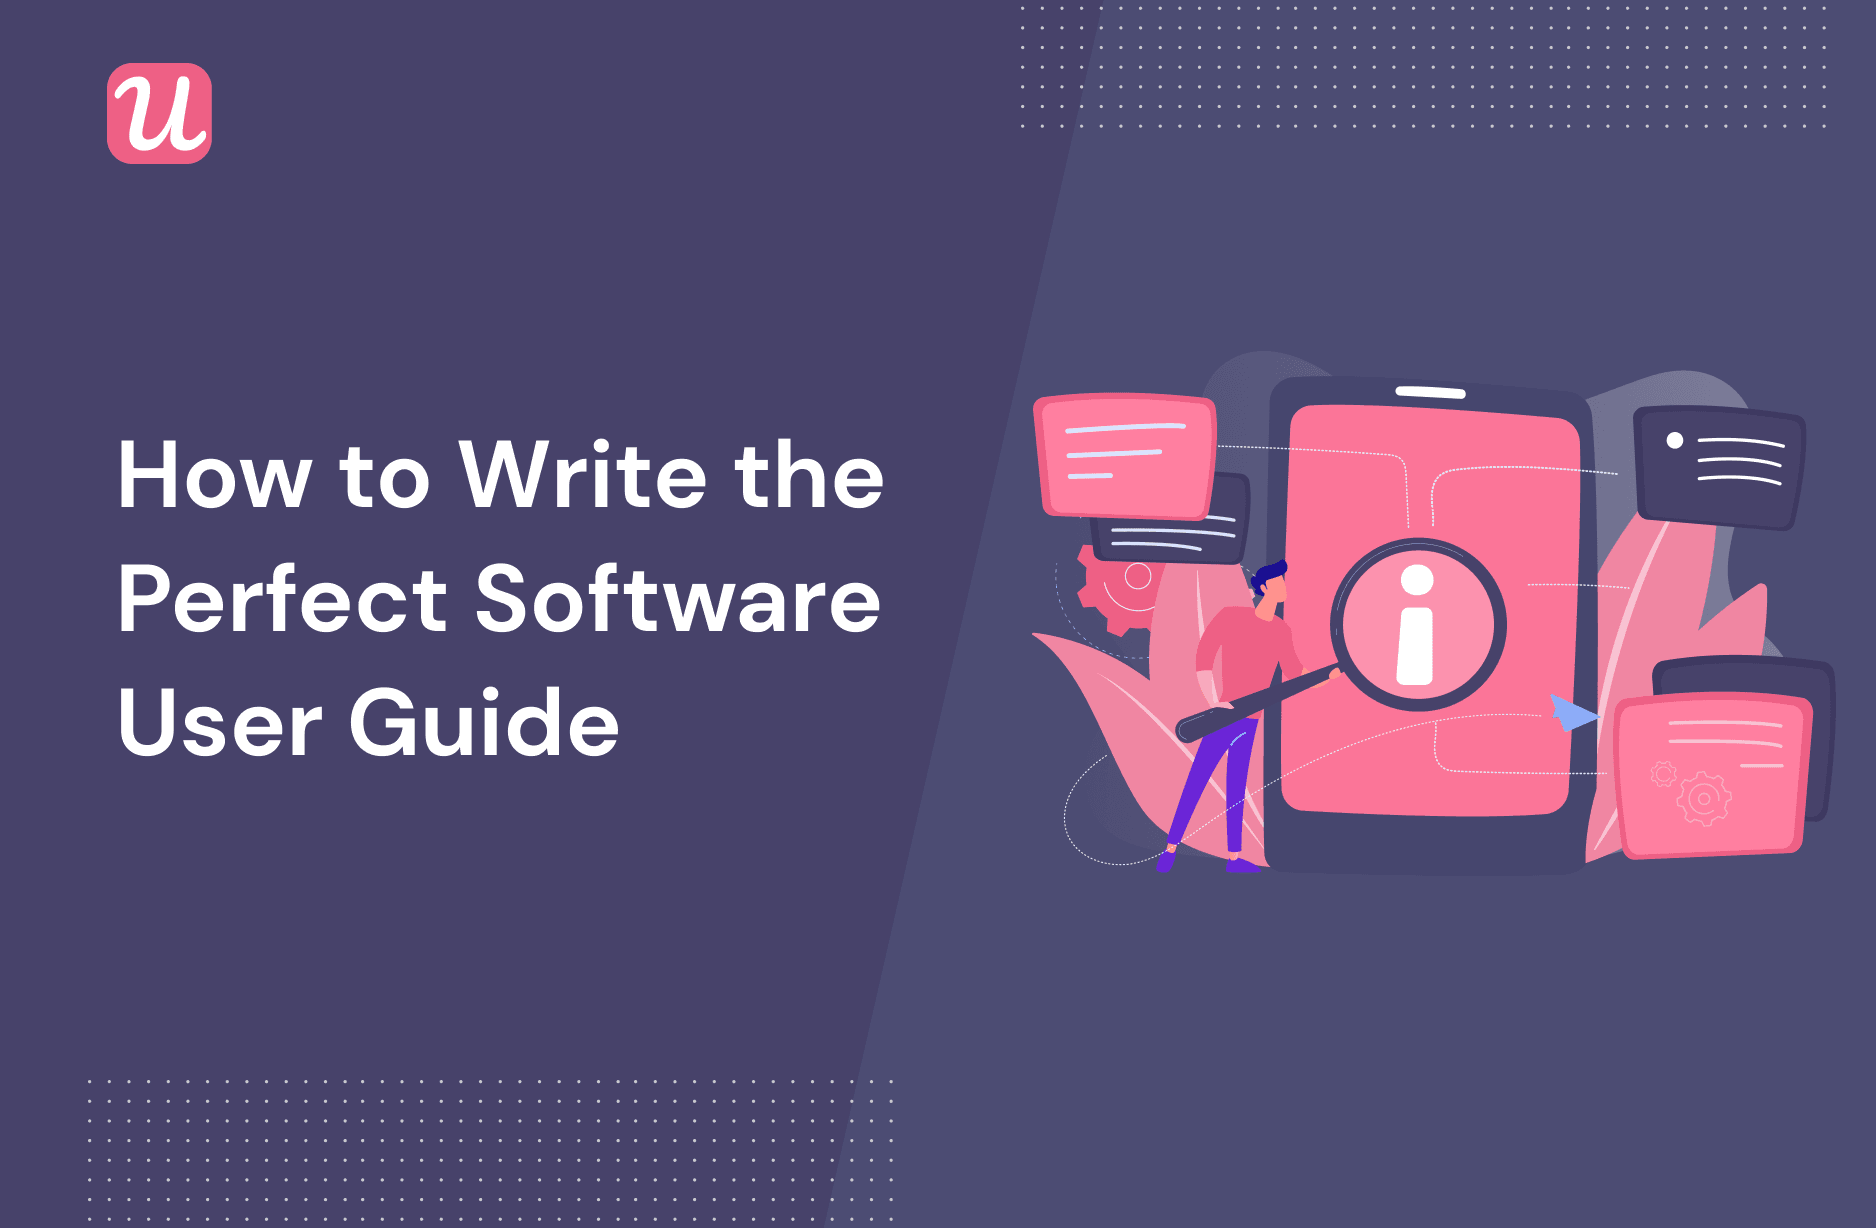 How to Write the Perfect Software User Guide